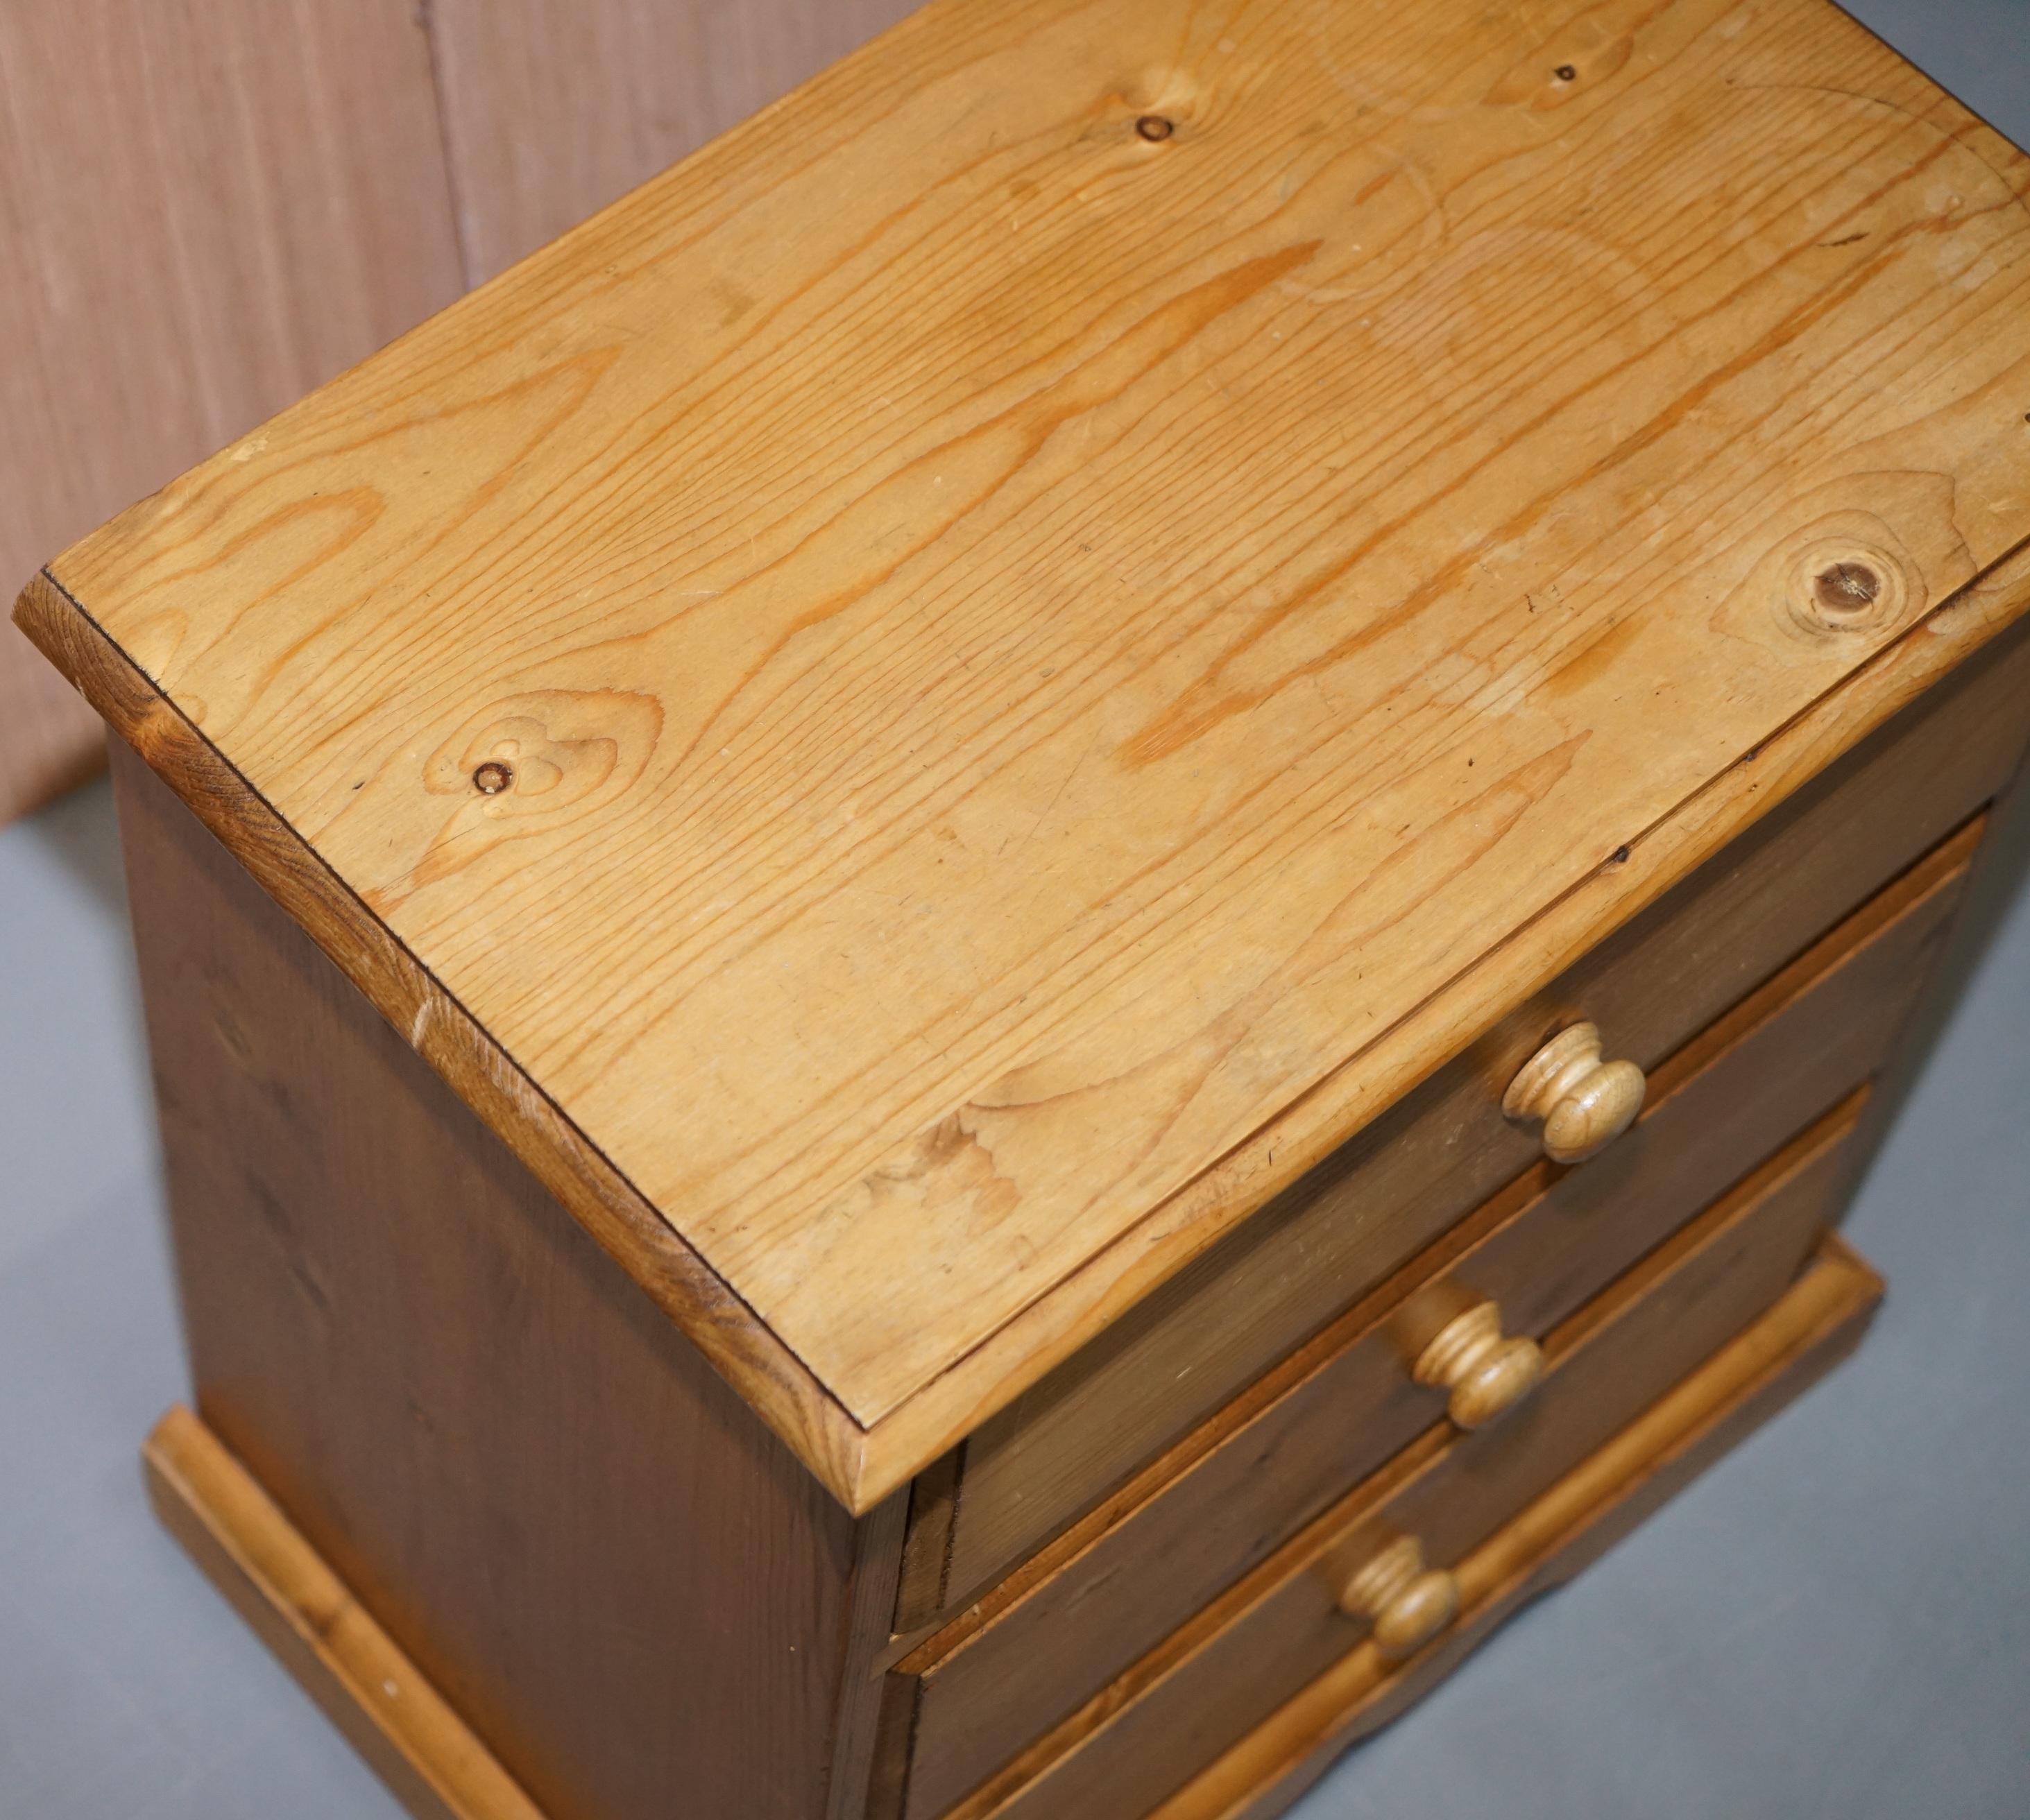 Hand-Crafted Lovely Small English Oak Vintage circa 1960s Bedside Table Chest of Drawers